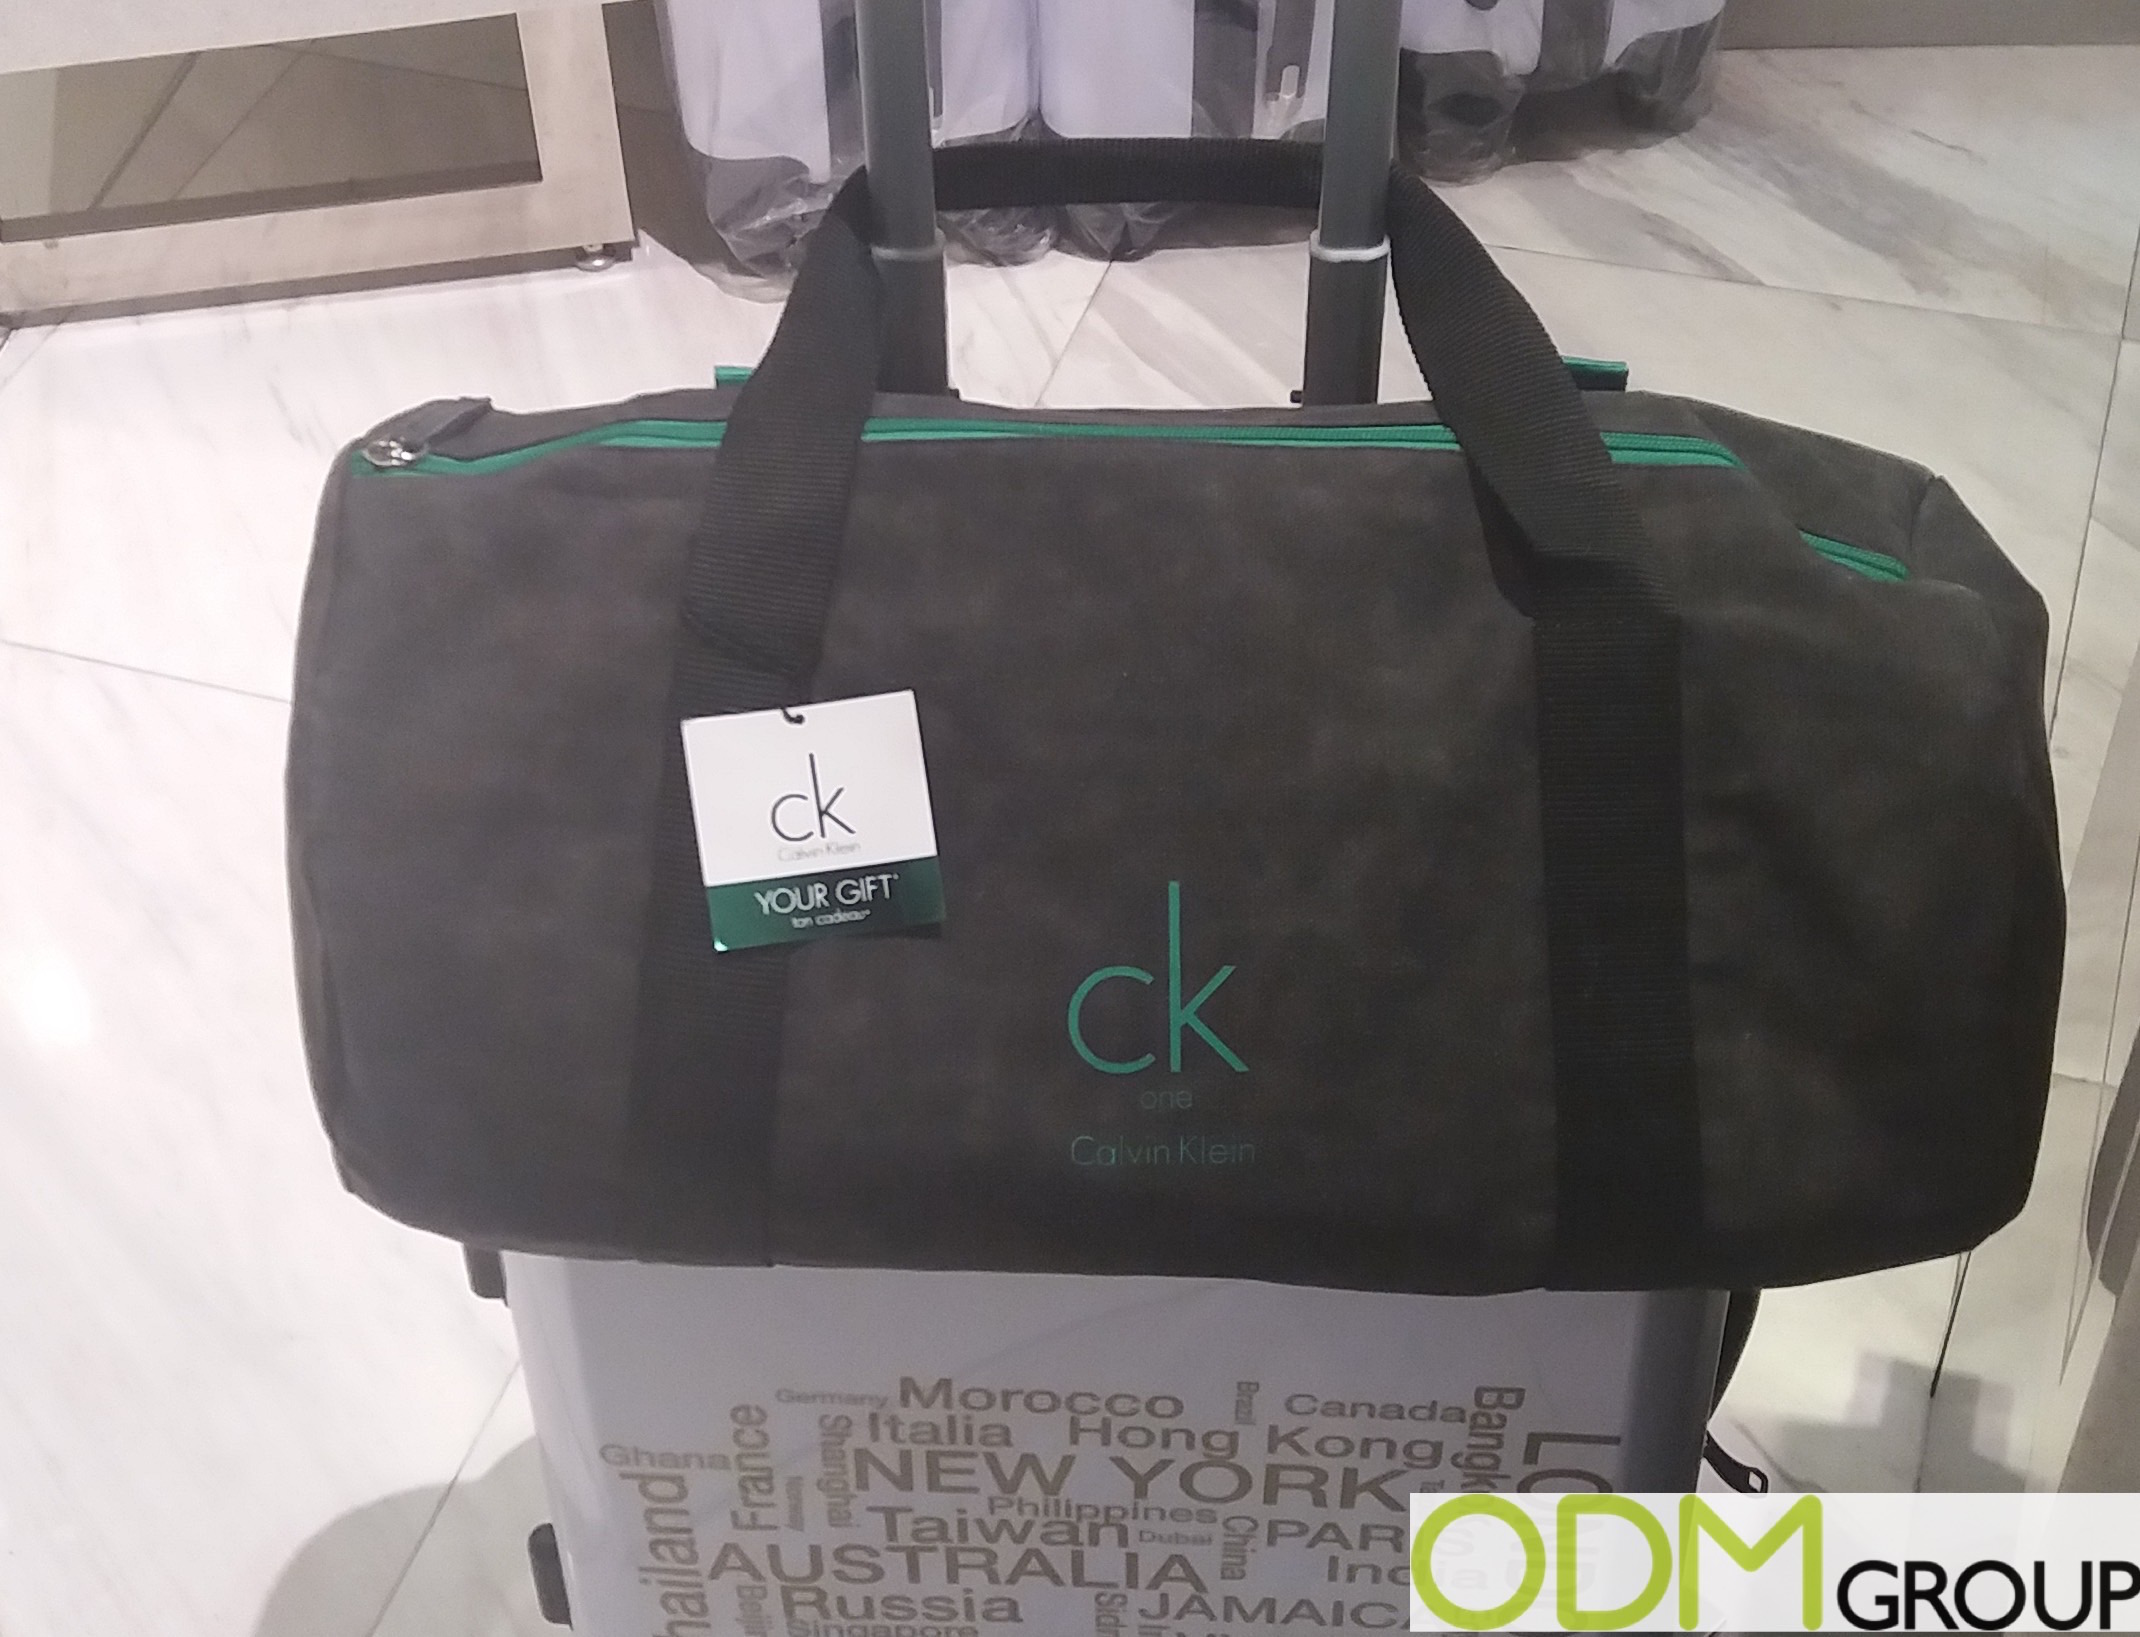 Exclusive Promotional Offer - Calvin Klein bag as GWP